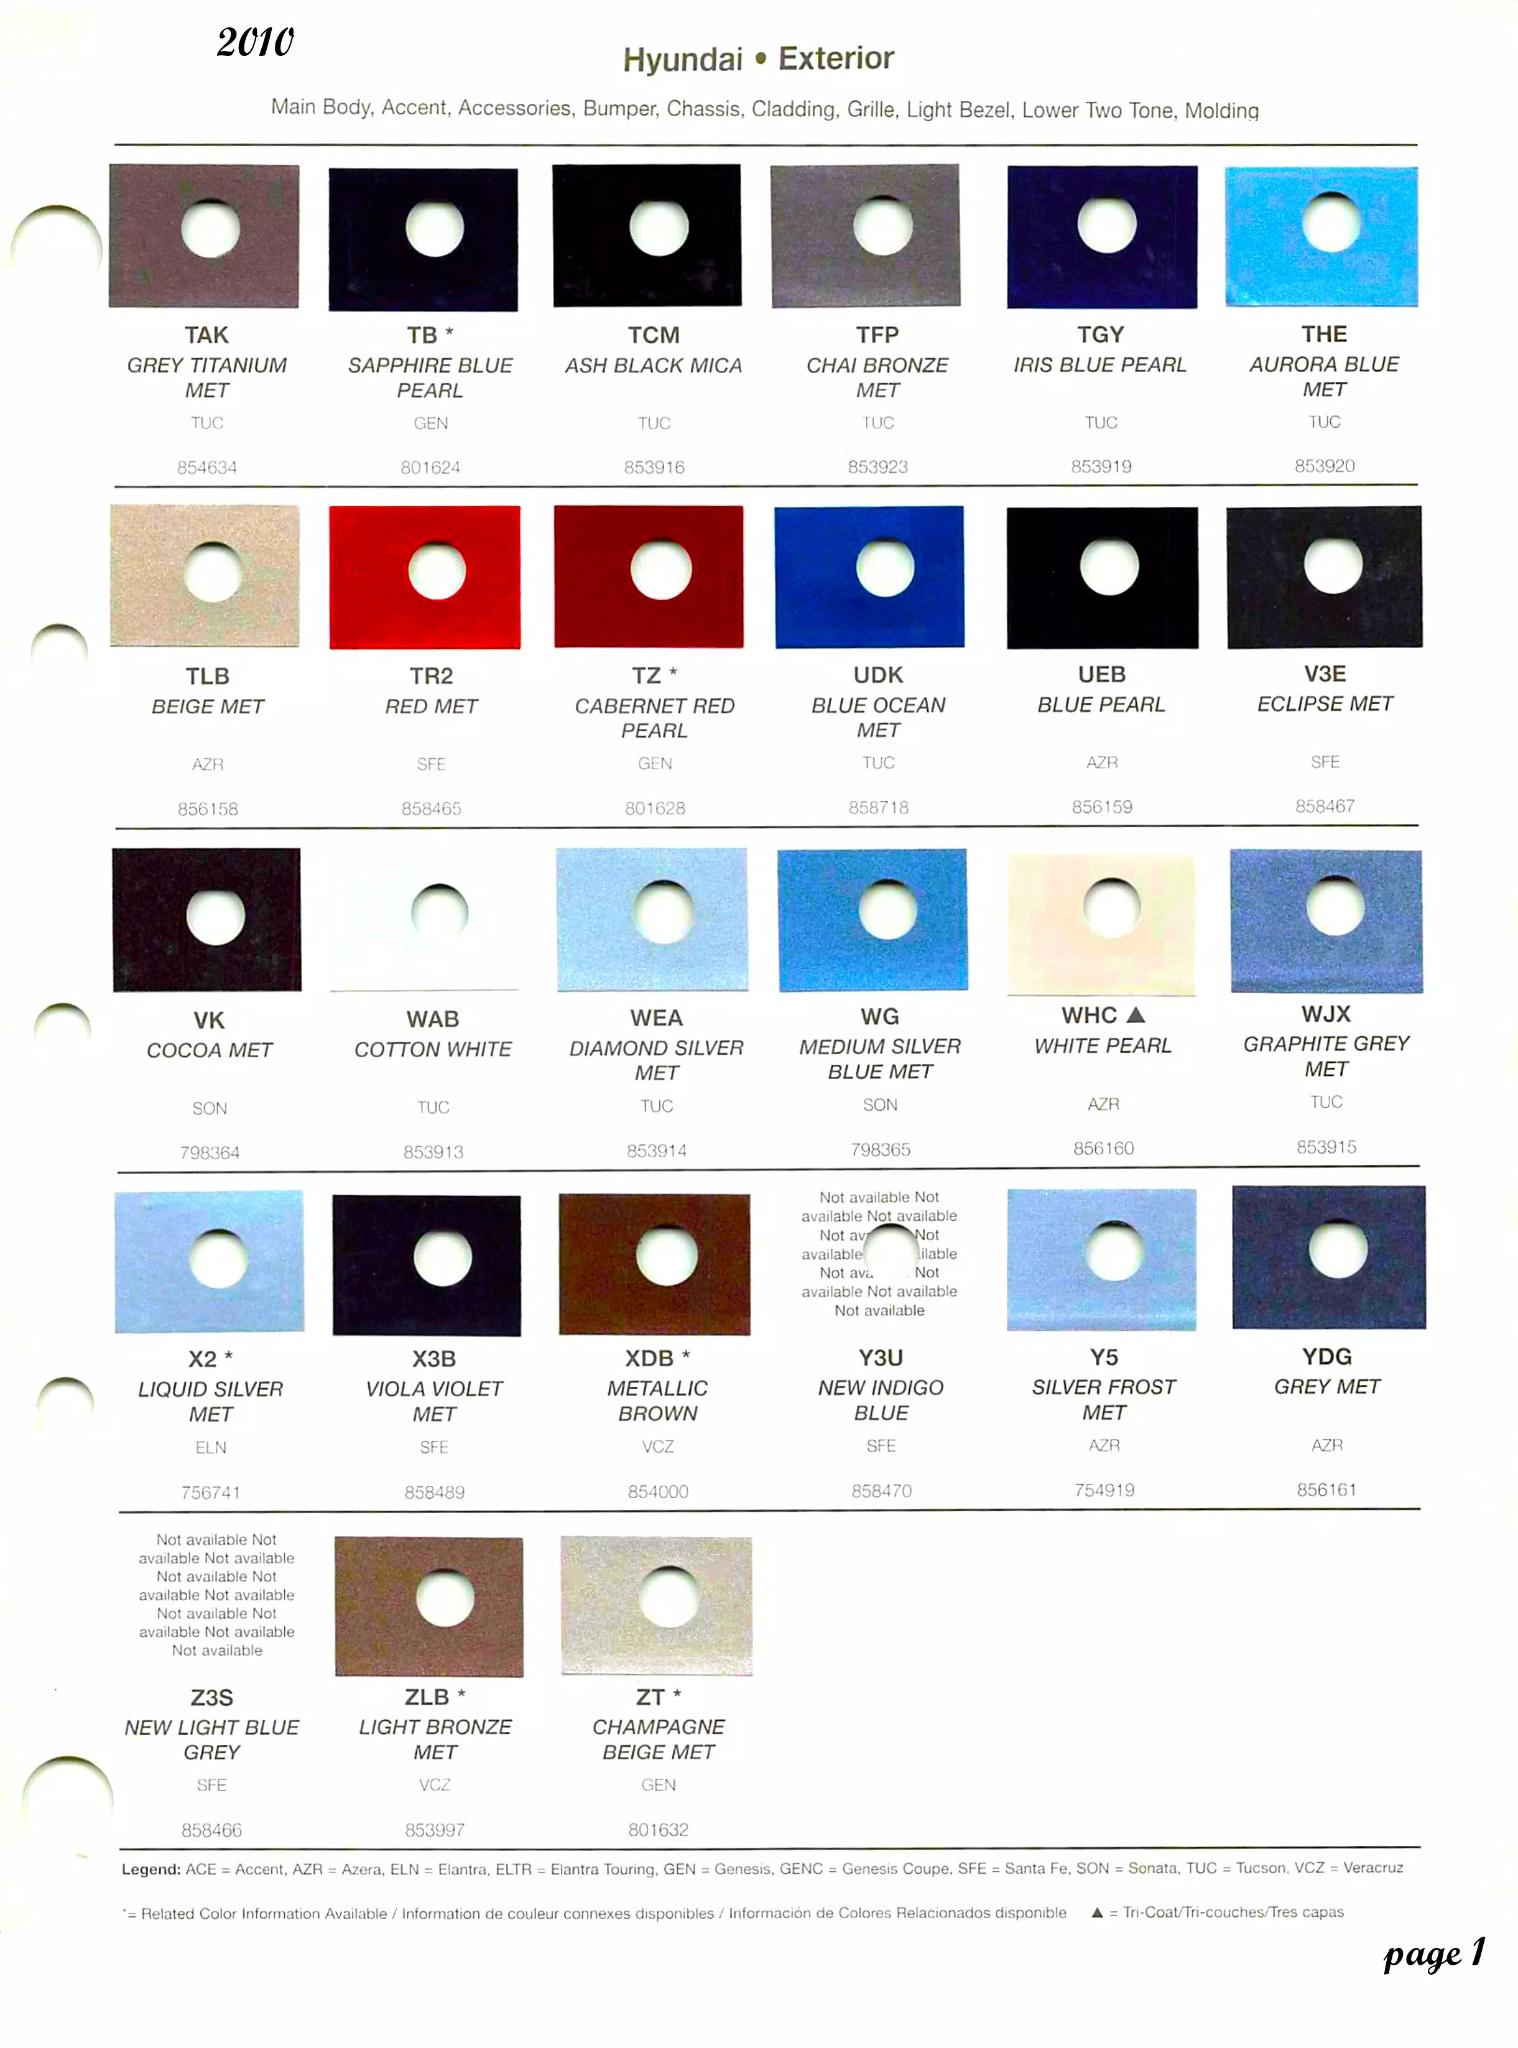 Paint color swatches, color names, mixing stock numbers, and the vehicle they go to for 2010 Hyundai automobiles.